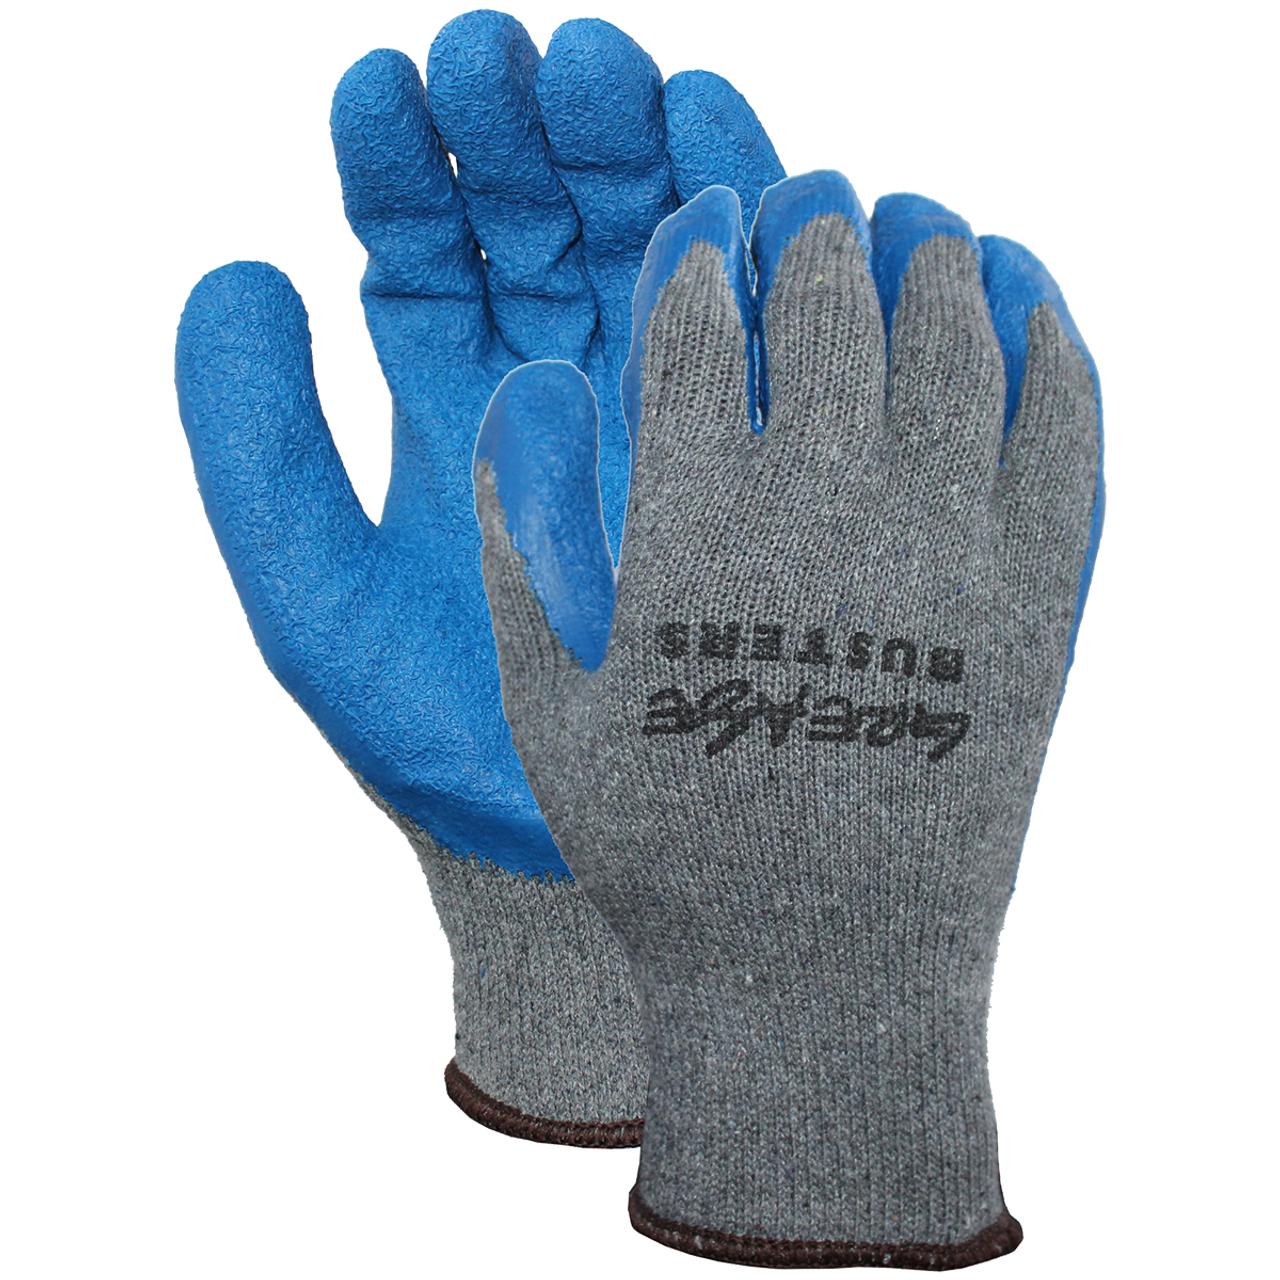 https://cdn11.bigcommerce.com/s-a5uwe4c7wz/images/stencil/1280x1280/products/888/2183/GCL10G_Glove__10603.1619123511.png?c=1